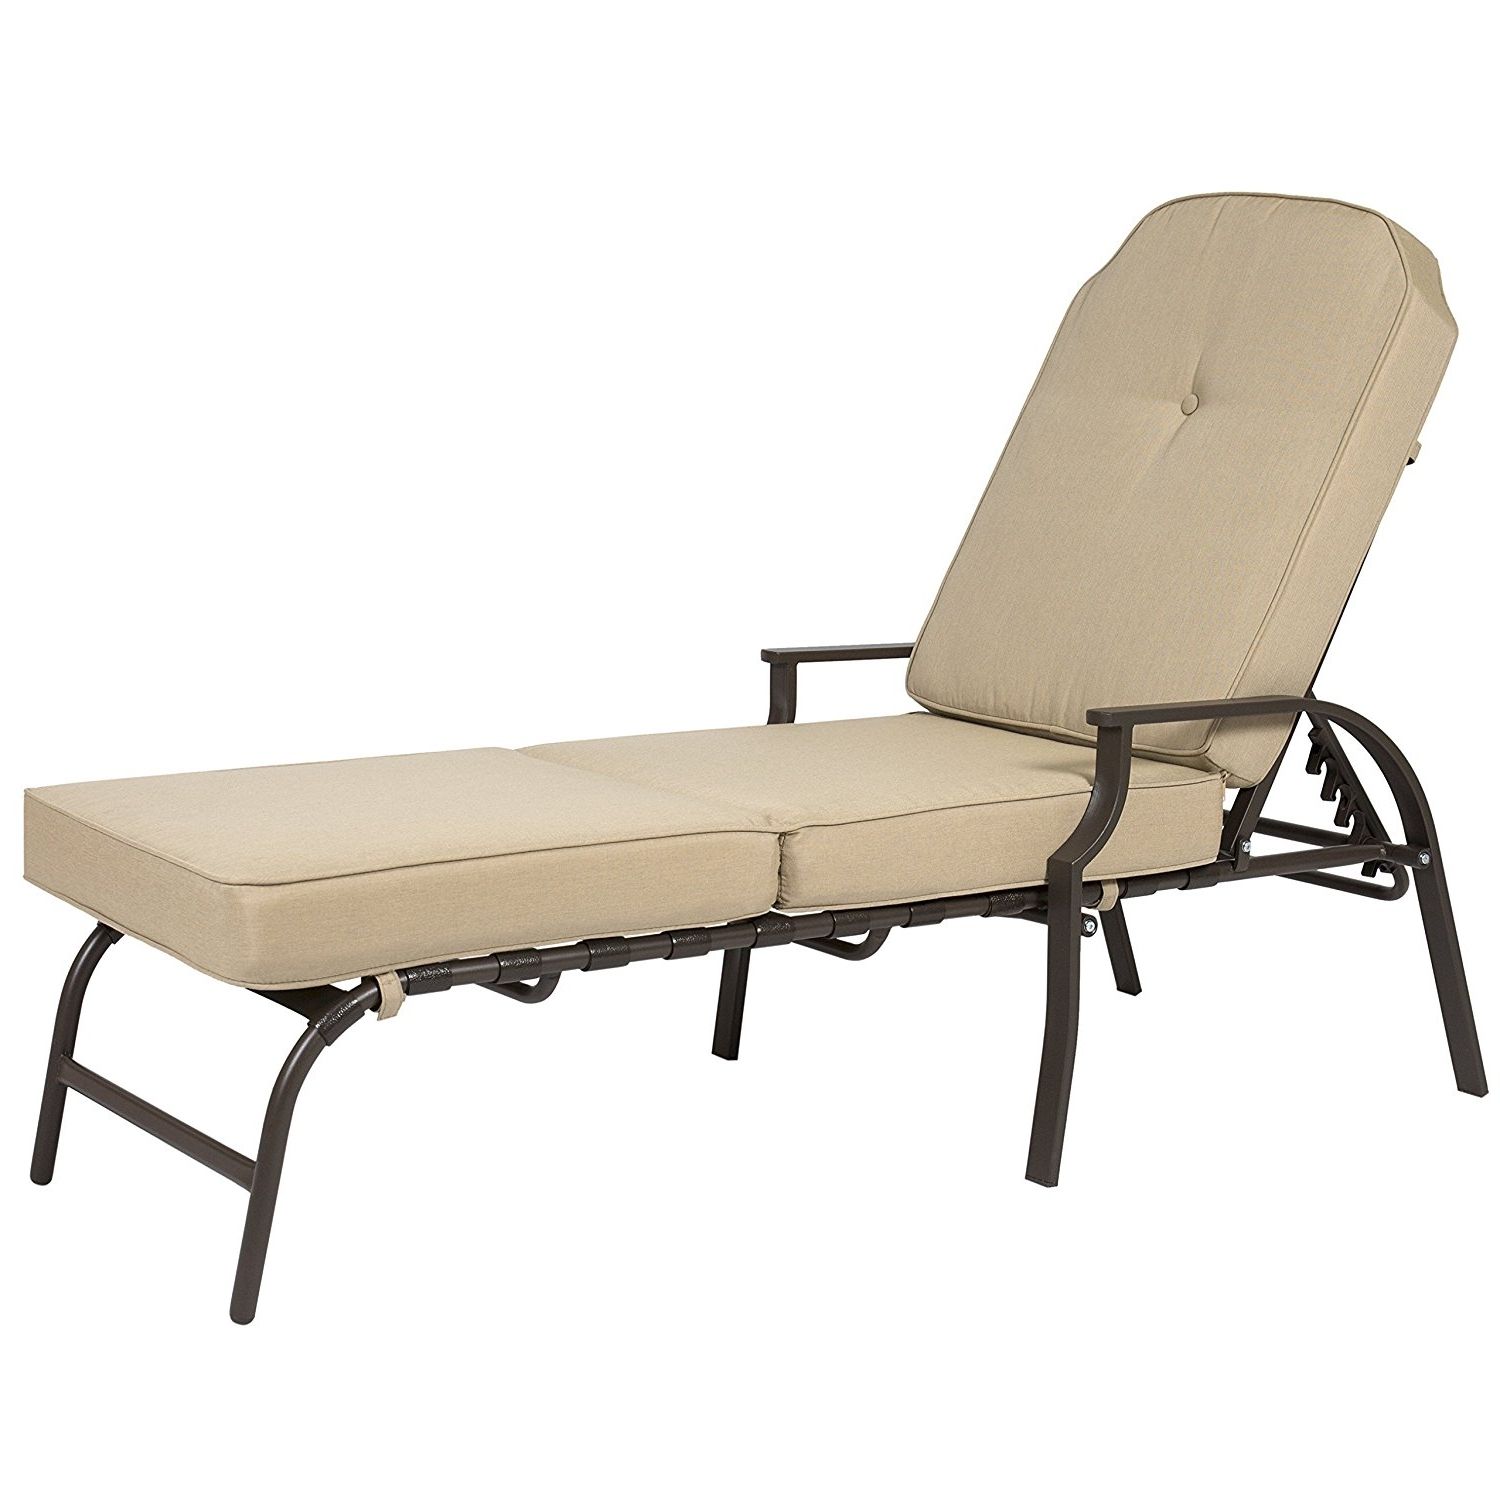 Newest Metal Chaise Lounge Chairs Intended For Amazon : Best Choice Products Outdoor Chaise Lounge Chair W (View 6 of 15)